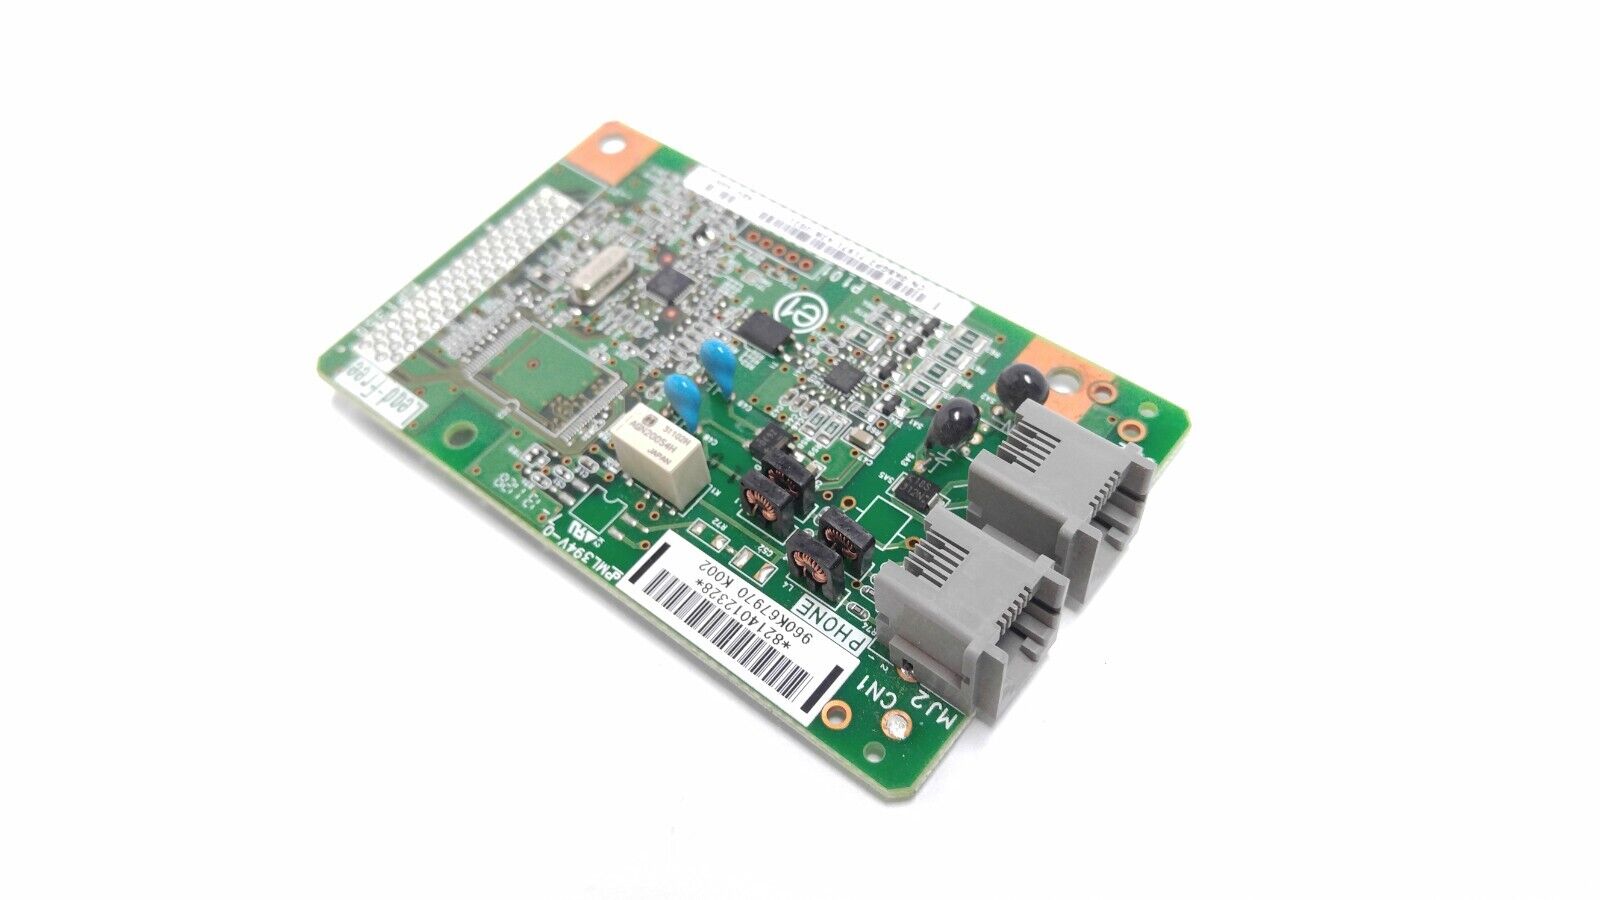 Dell C2665dnf Fax board assembly - 960K67970 - Click Image to Close